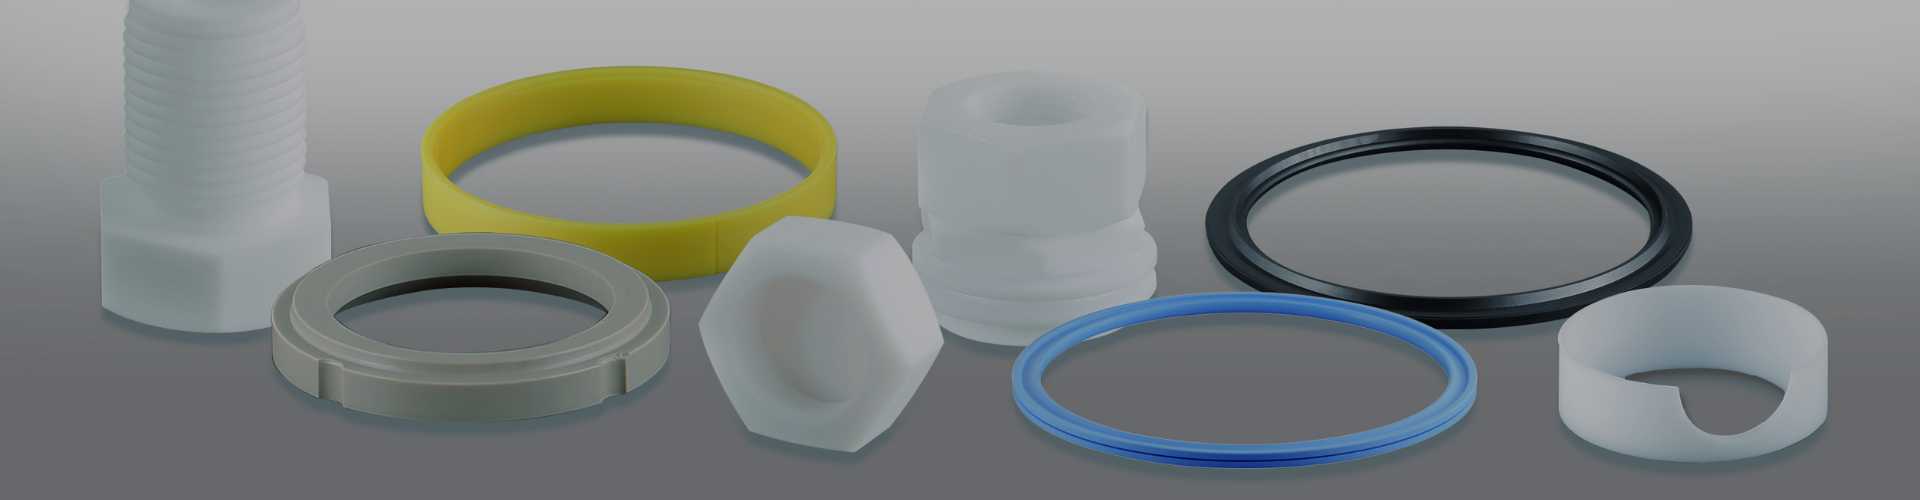 Do You Need PTFE in Your Projects